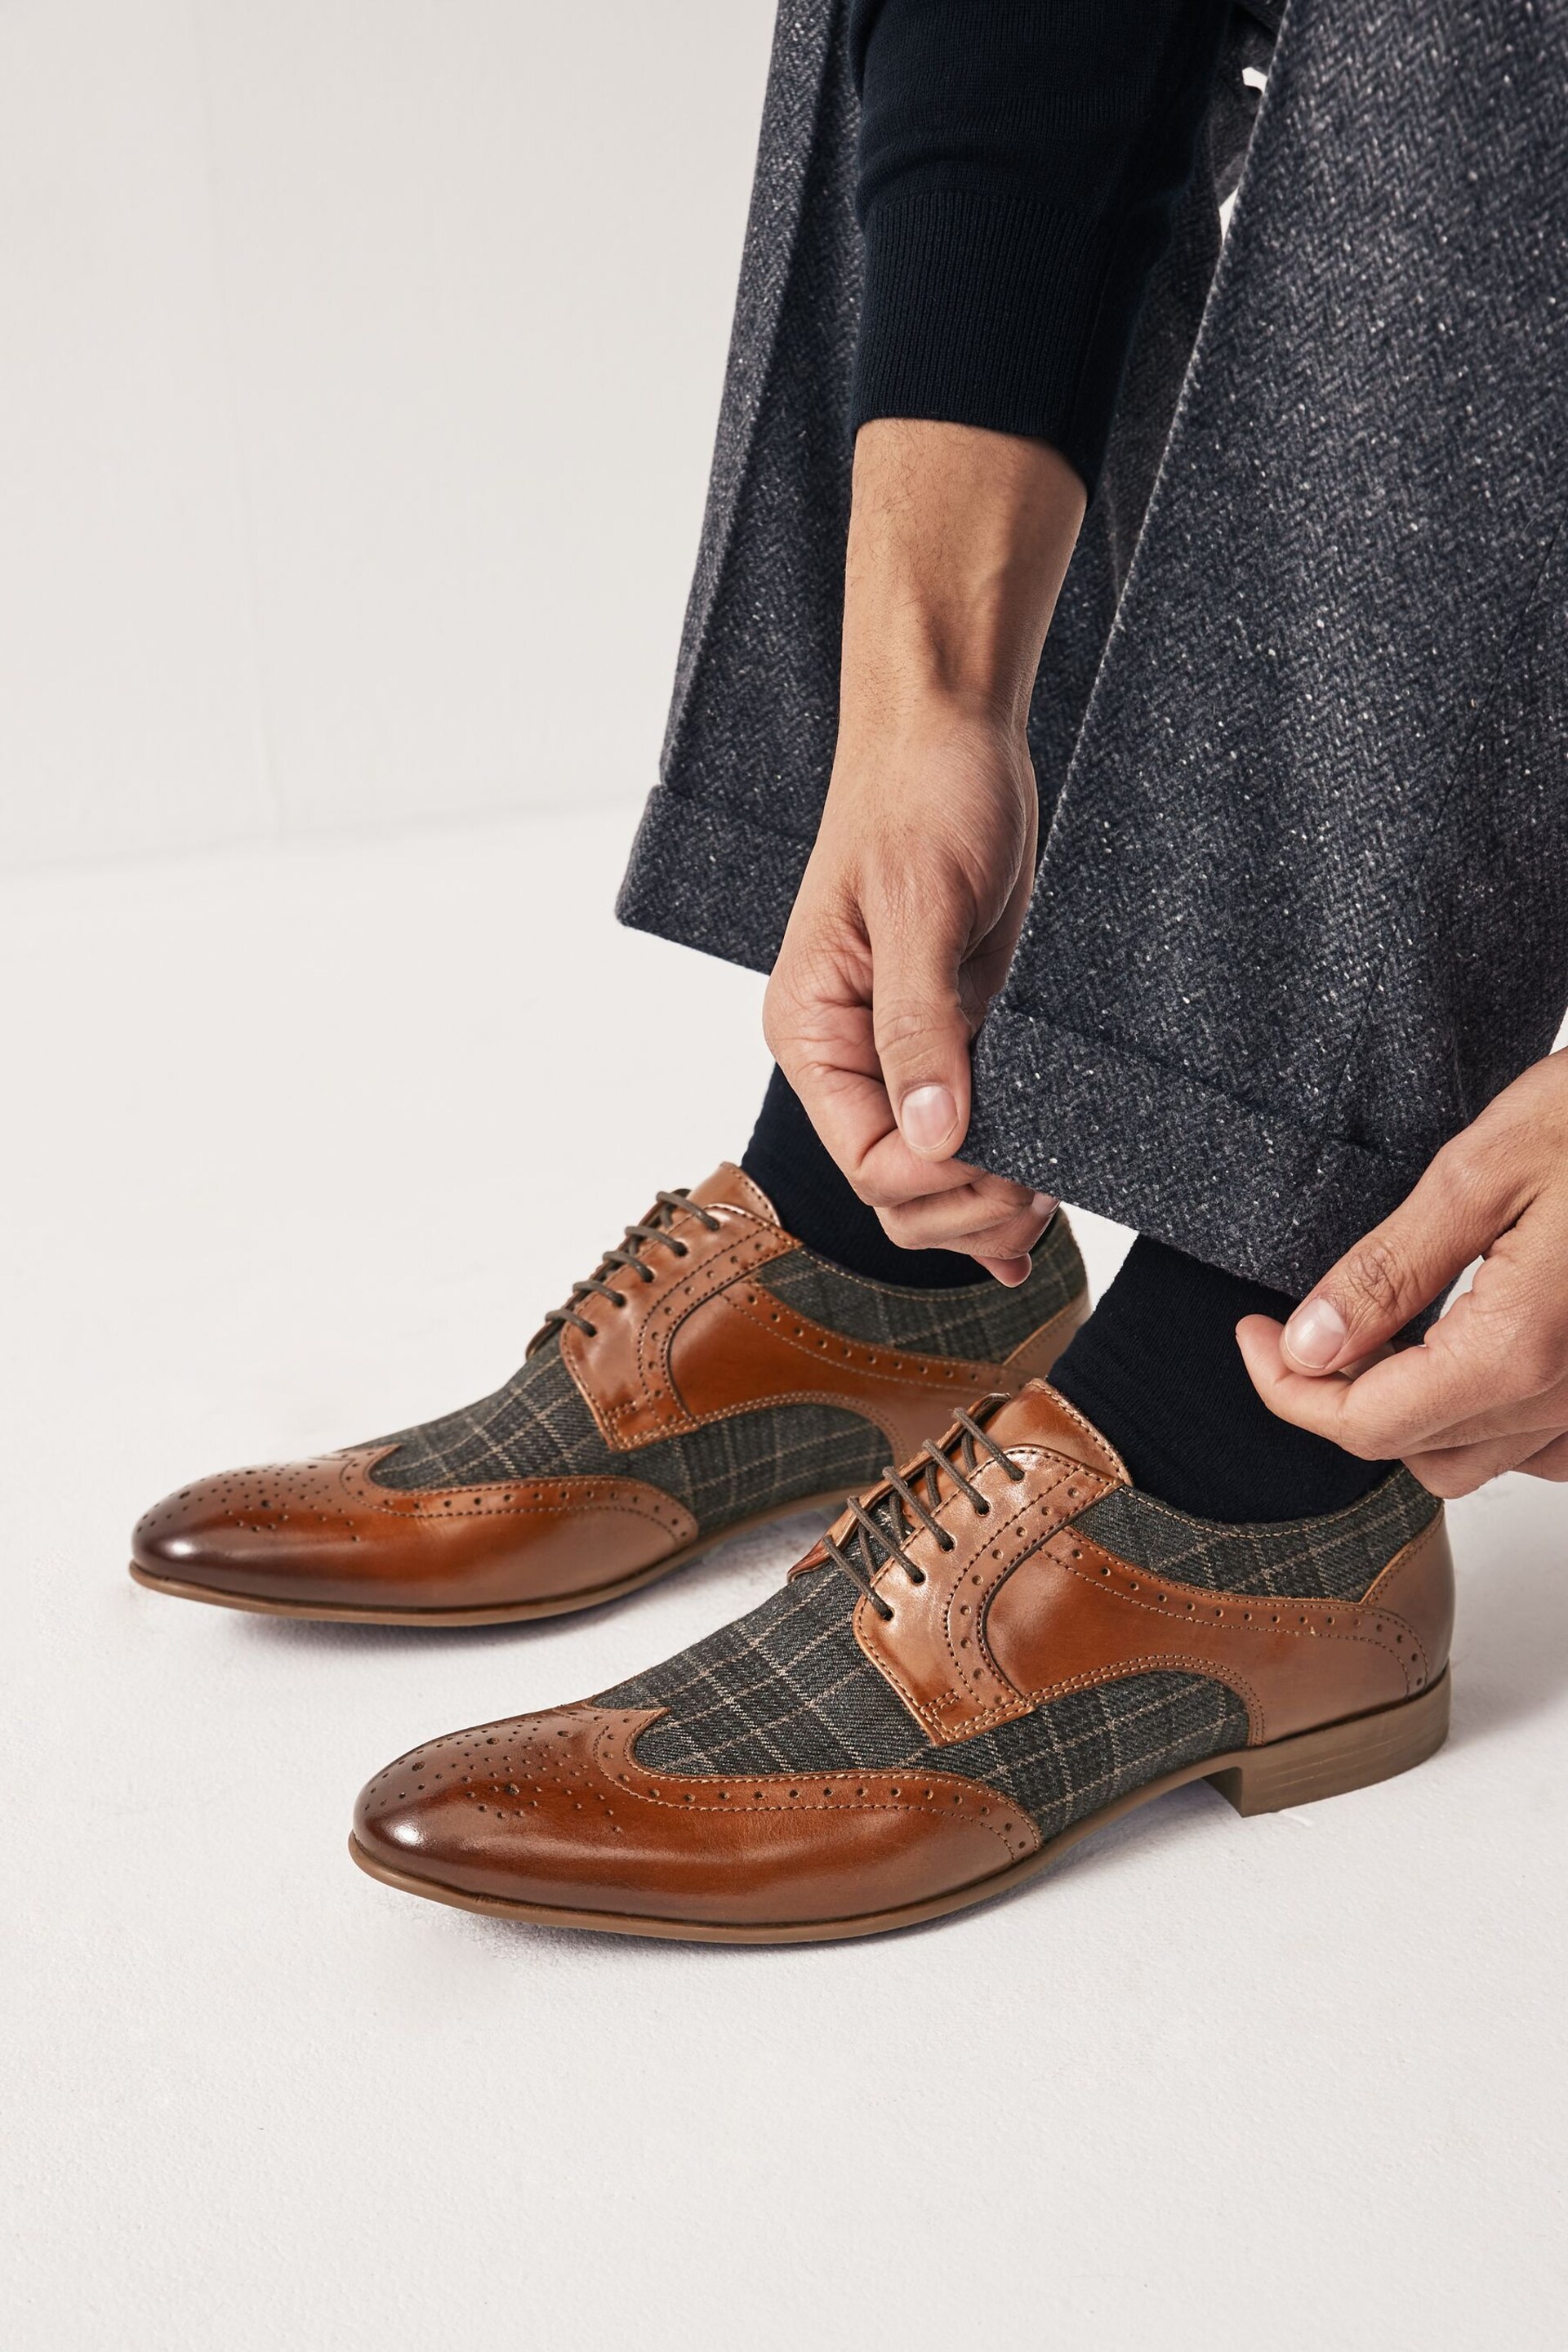 Tan Brown Leather & Check Brogue Shoes - Image 1 of 7